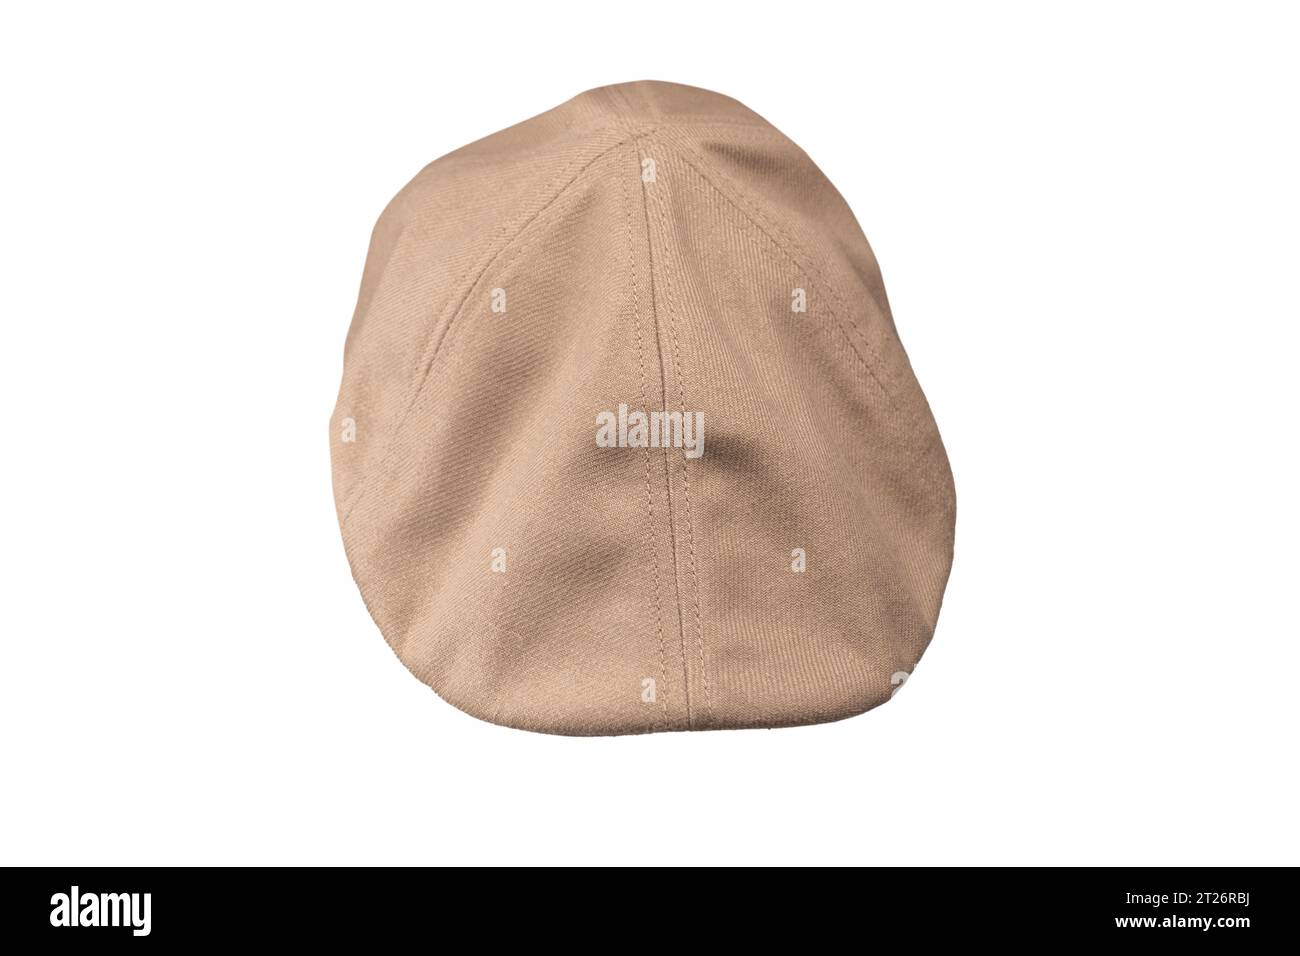 Light brown ascot cap isolated on a white background. Stock Photo